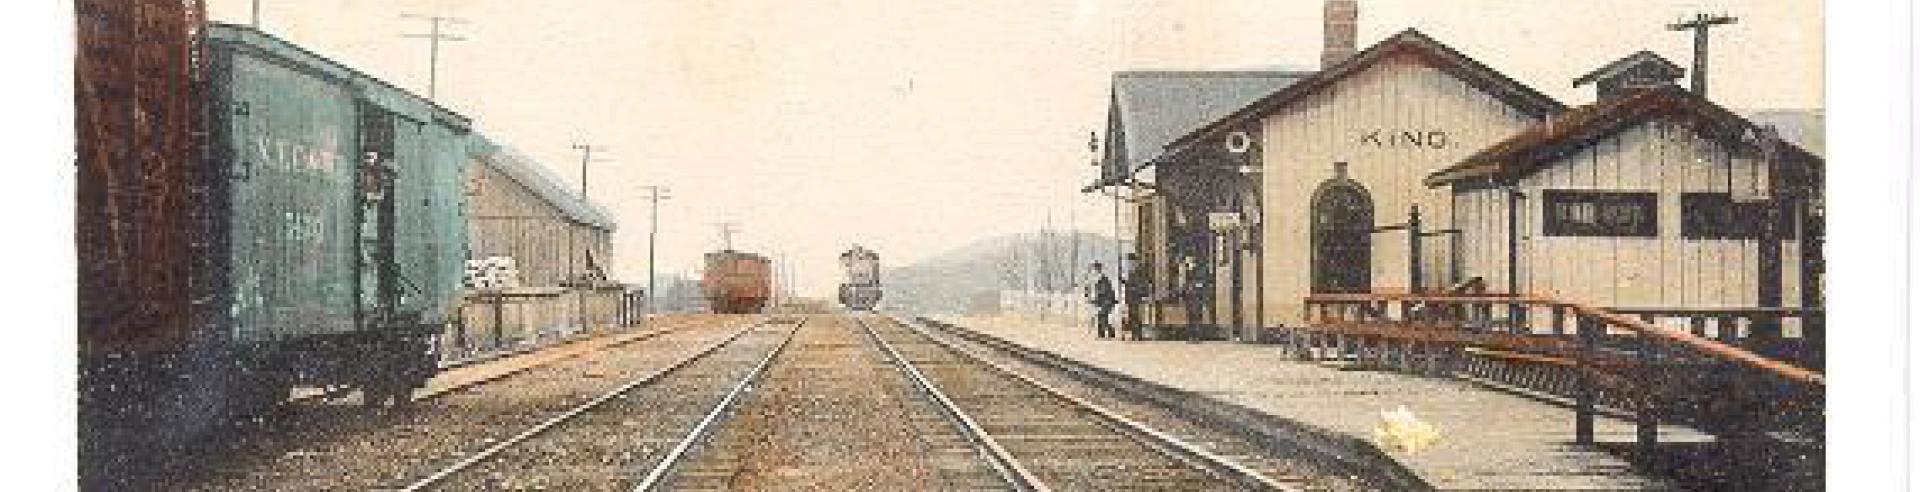 old picture of the King Railway Station